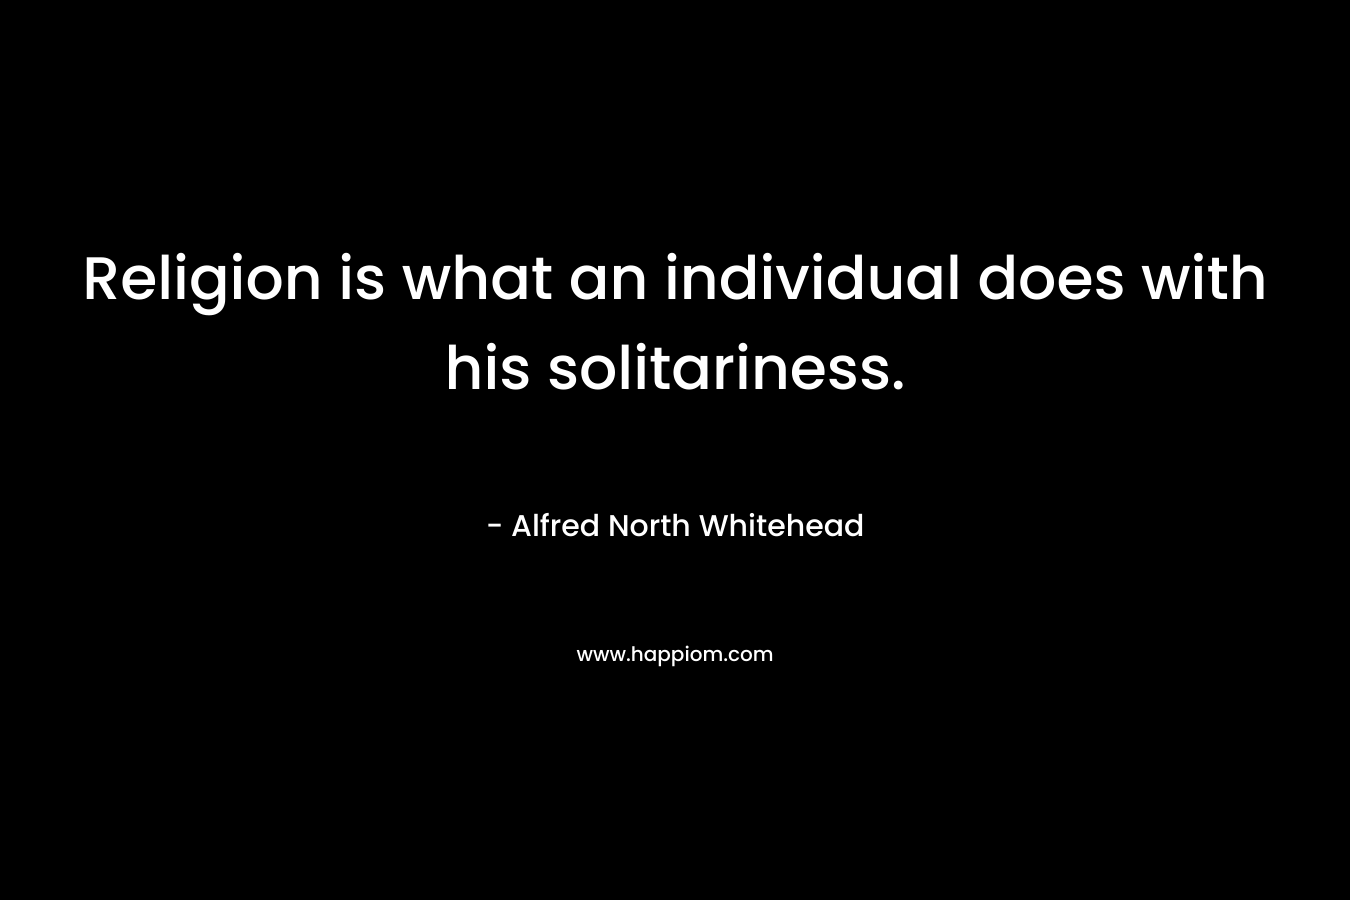 Religion is what an individual does with his solitariness. – Alfred North Whitehead